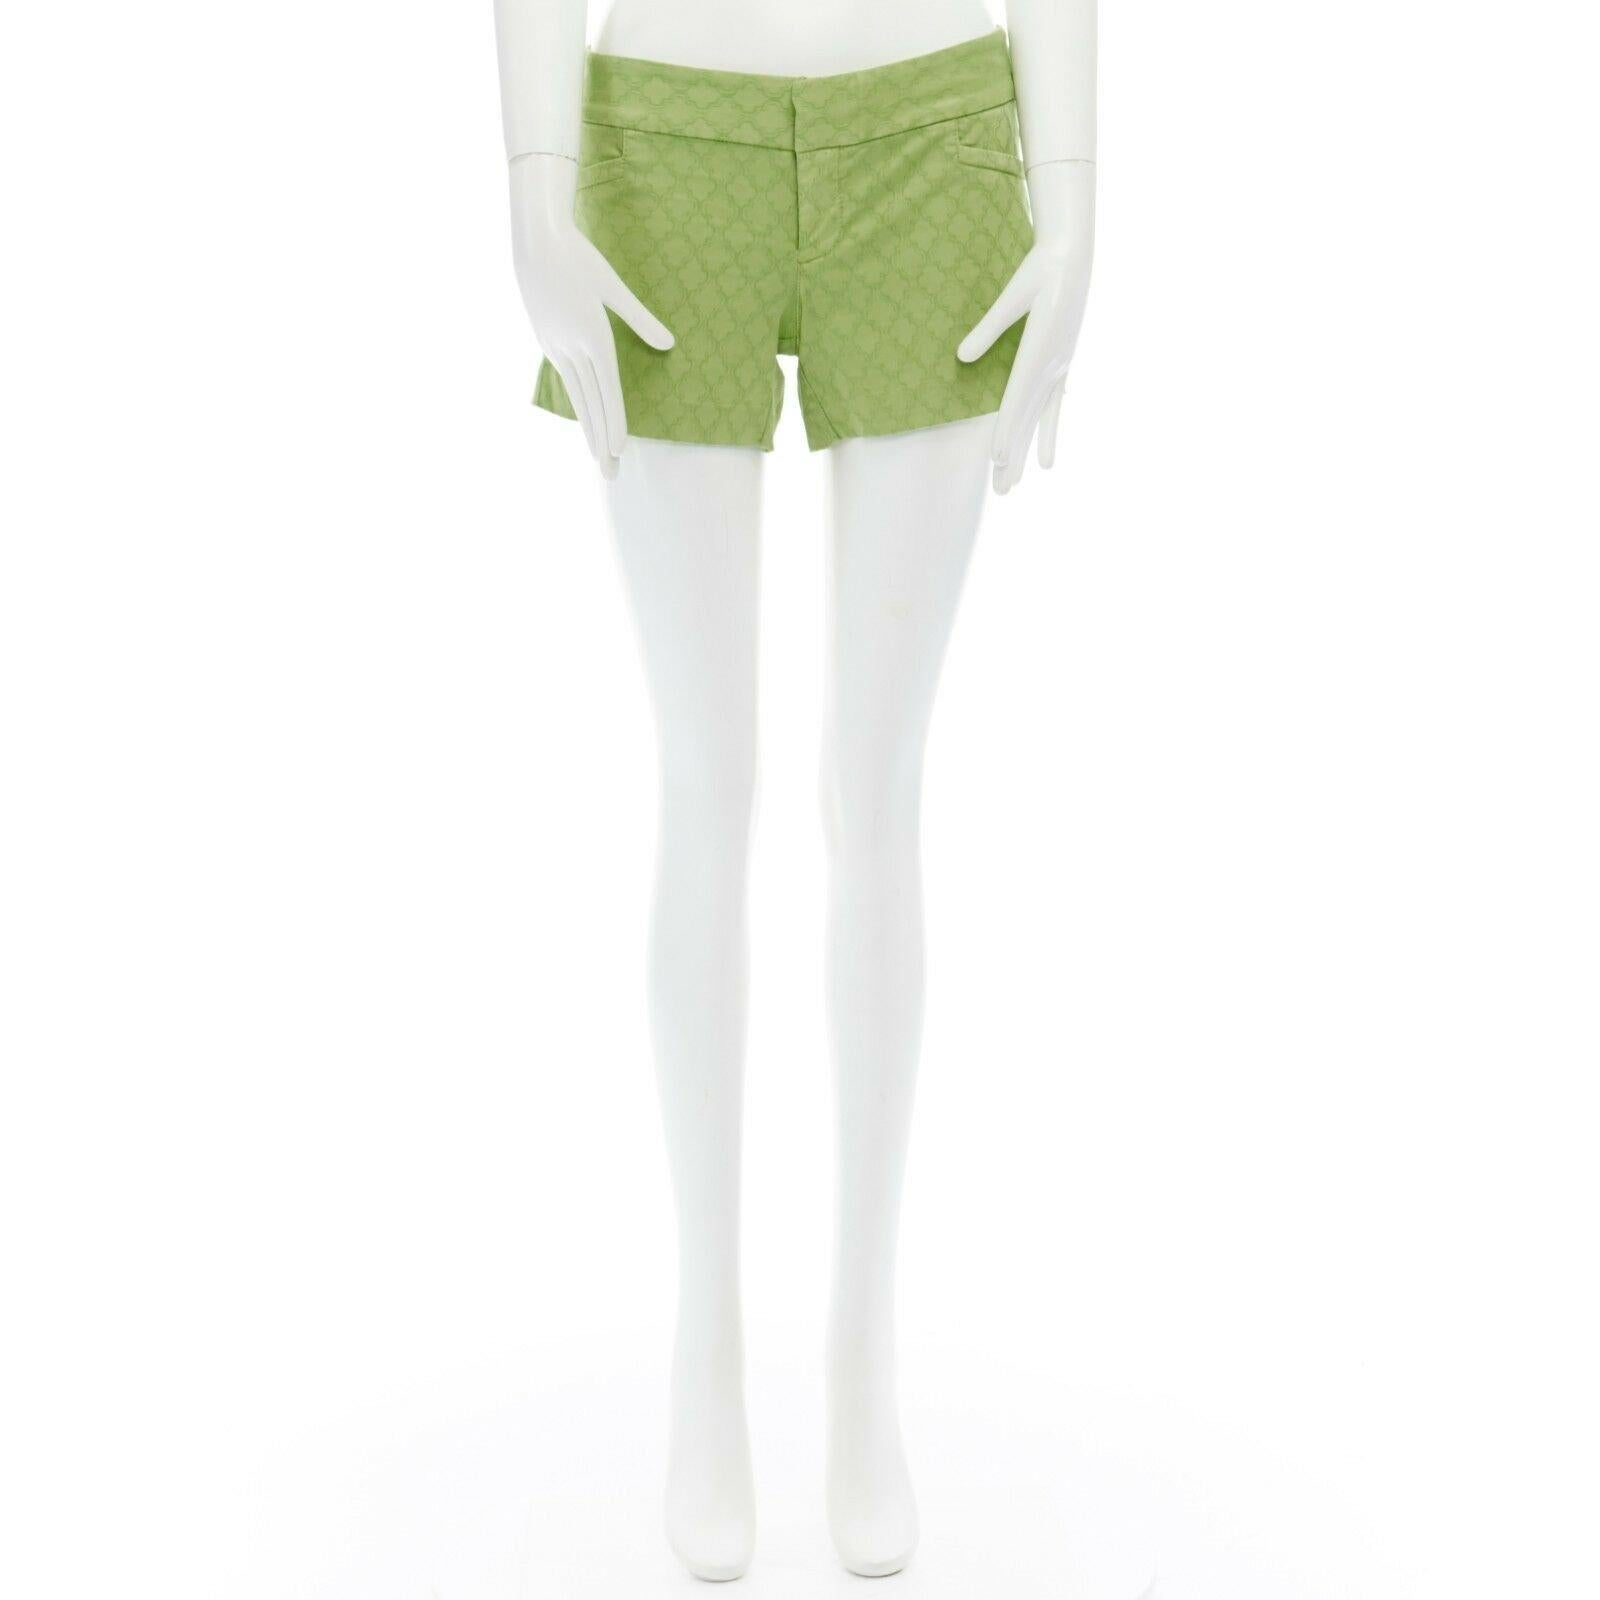 LILLY PULITZER 100% cotton neon green textured cotton shorts US00 XXS 
Reference: LNKO/A00610 
Brand: Lilly Pulitzer 
Material: Cotton 
Color: Green 
Pattern: Other 
Closure: Zip 
Extra Detail: Cotton blend. Textured cotton. Neon green. Flat